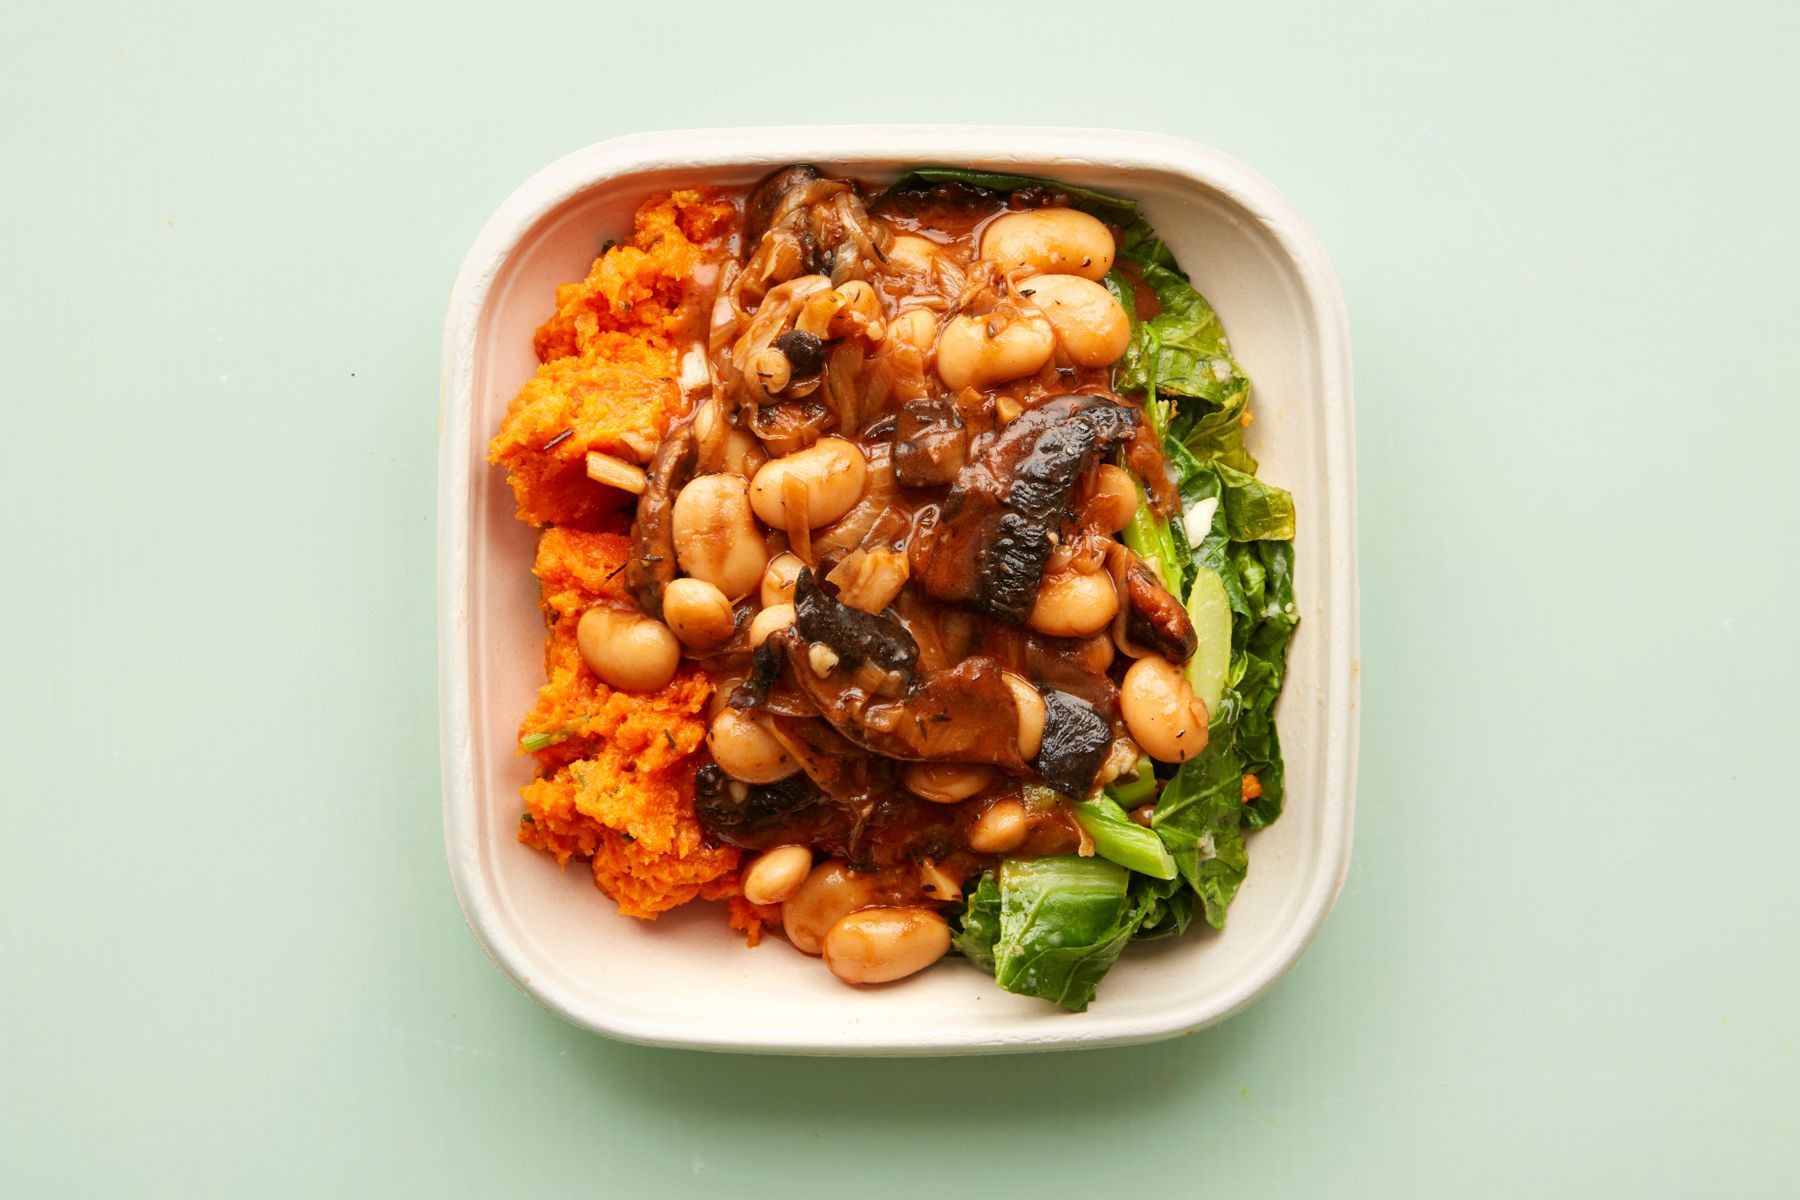 Lions Prep - Mushroom & Butterbean Cassoulet with Smashed Garlic, Parsley Butter Carrot Mash & Spring Greens